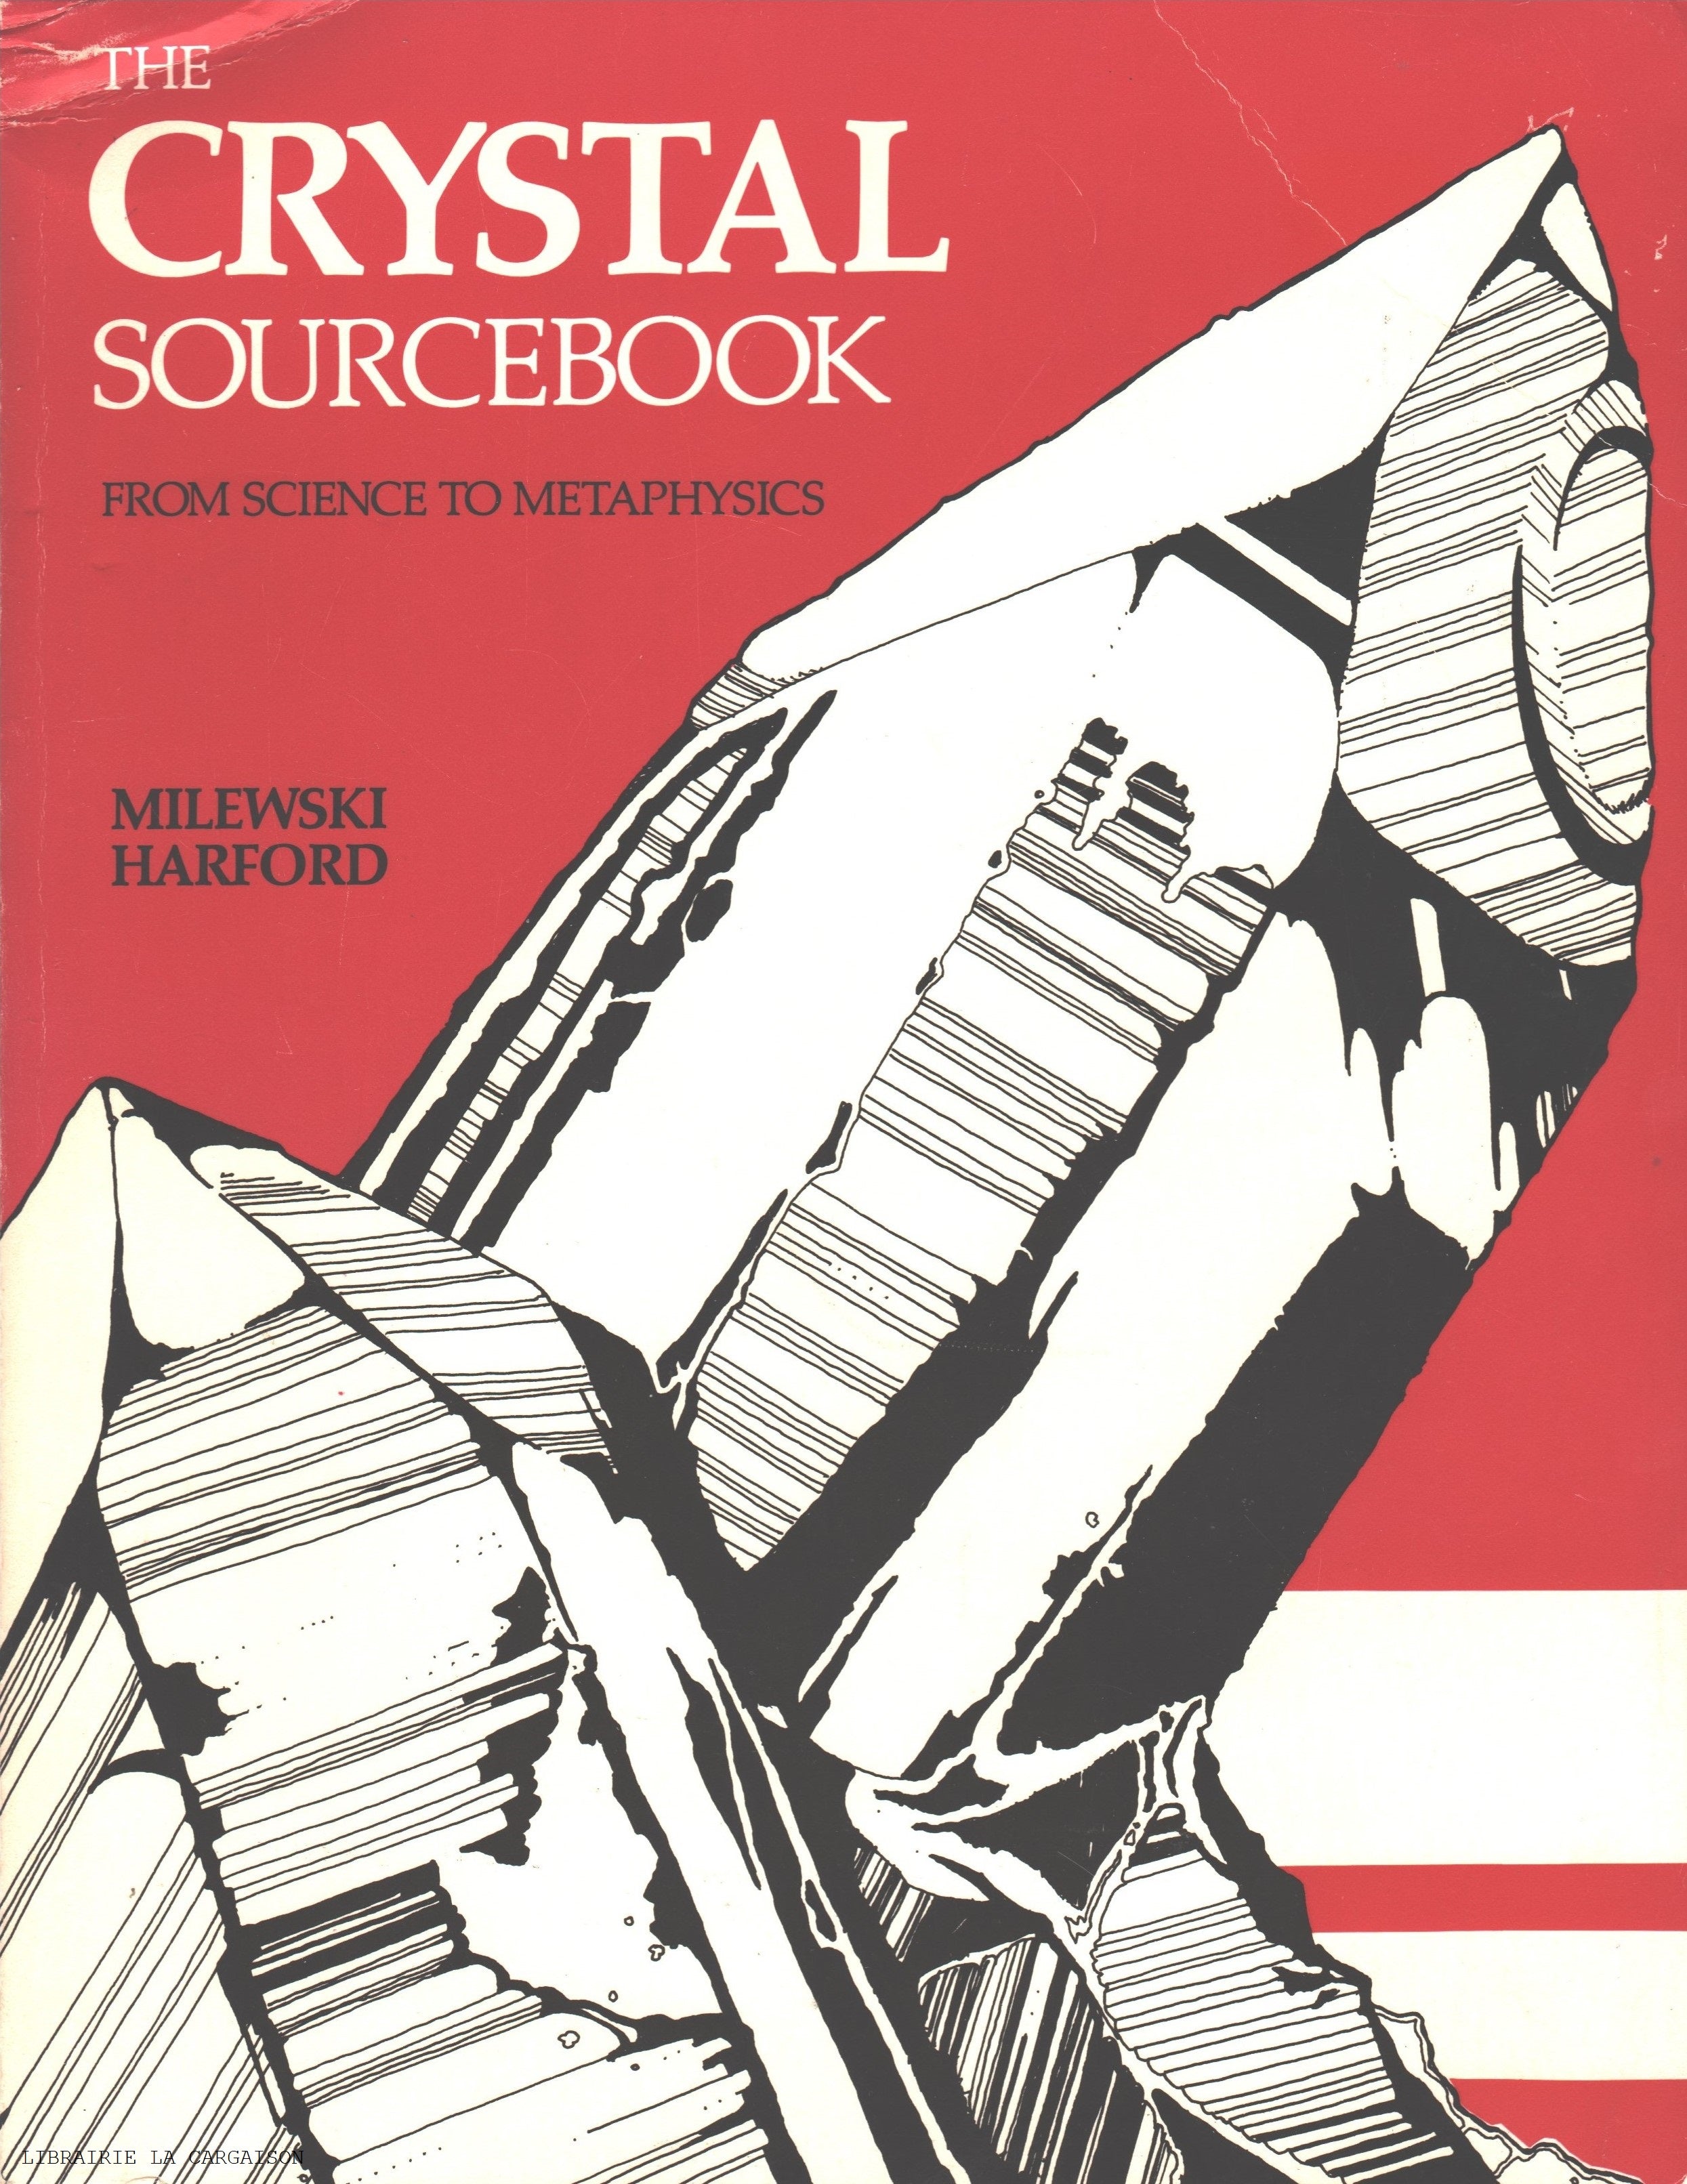 MILEWSKI-HARFORD. Crystal Sourcebook (The) : From Science to Metaphysics